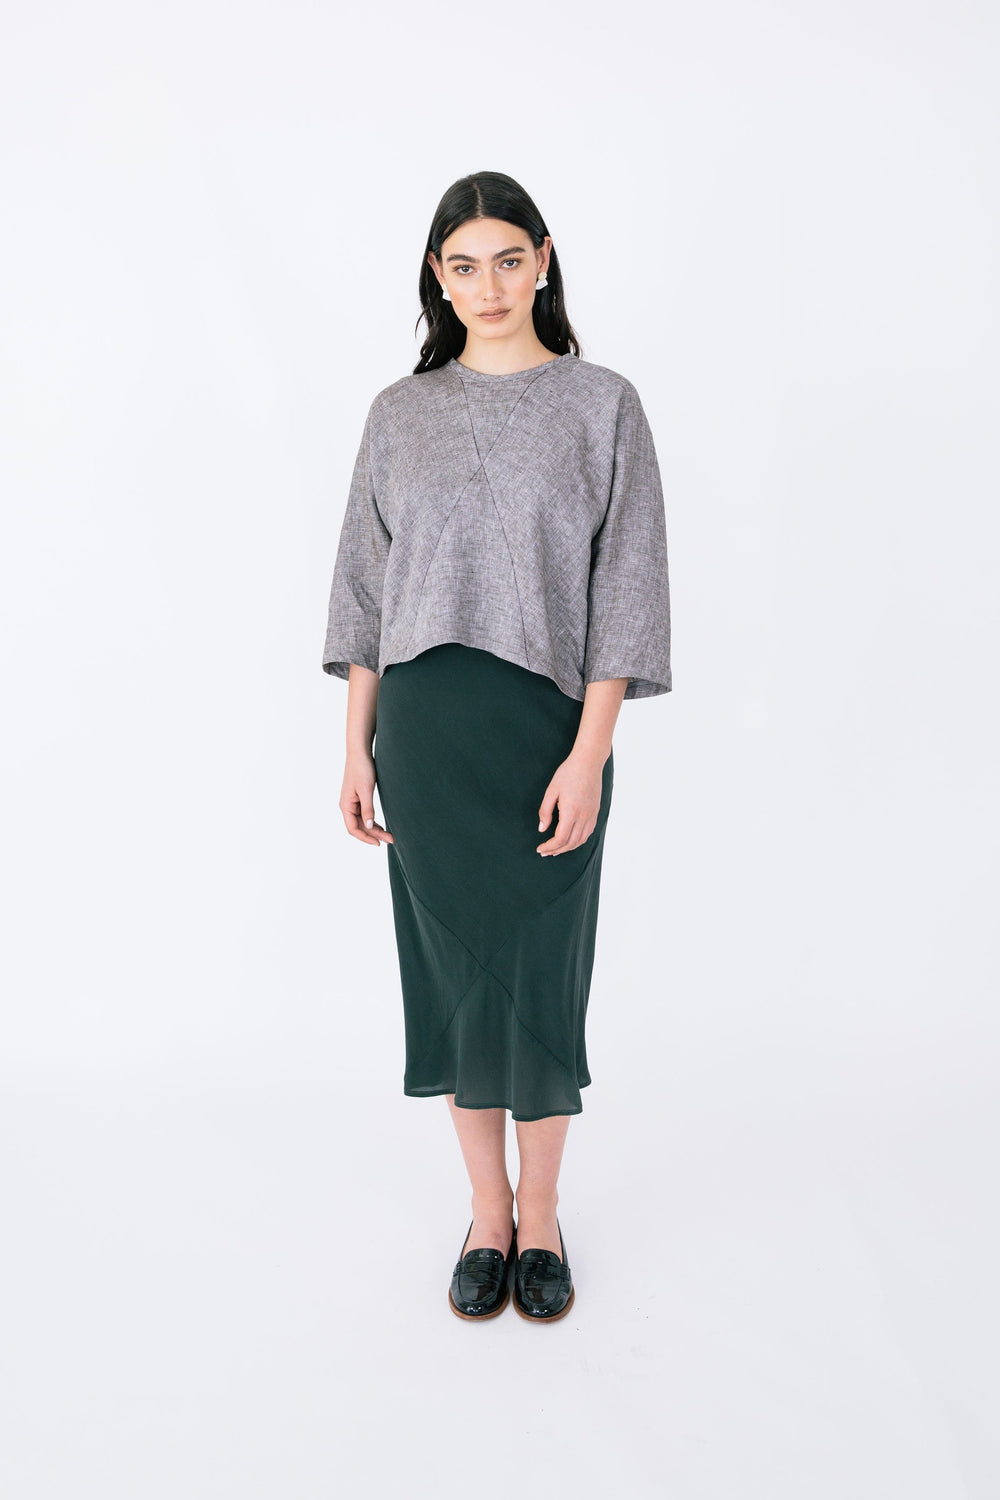 Papercut Patterns Pinnacle Top and Sweater